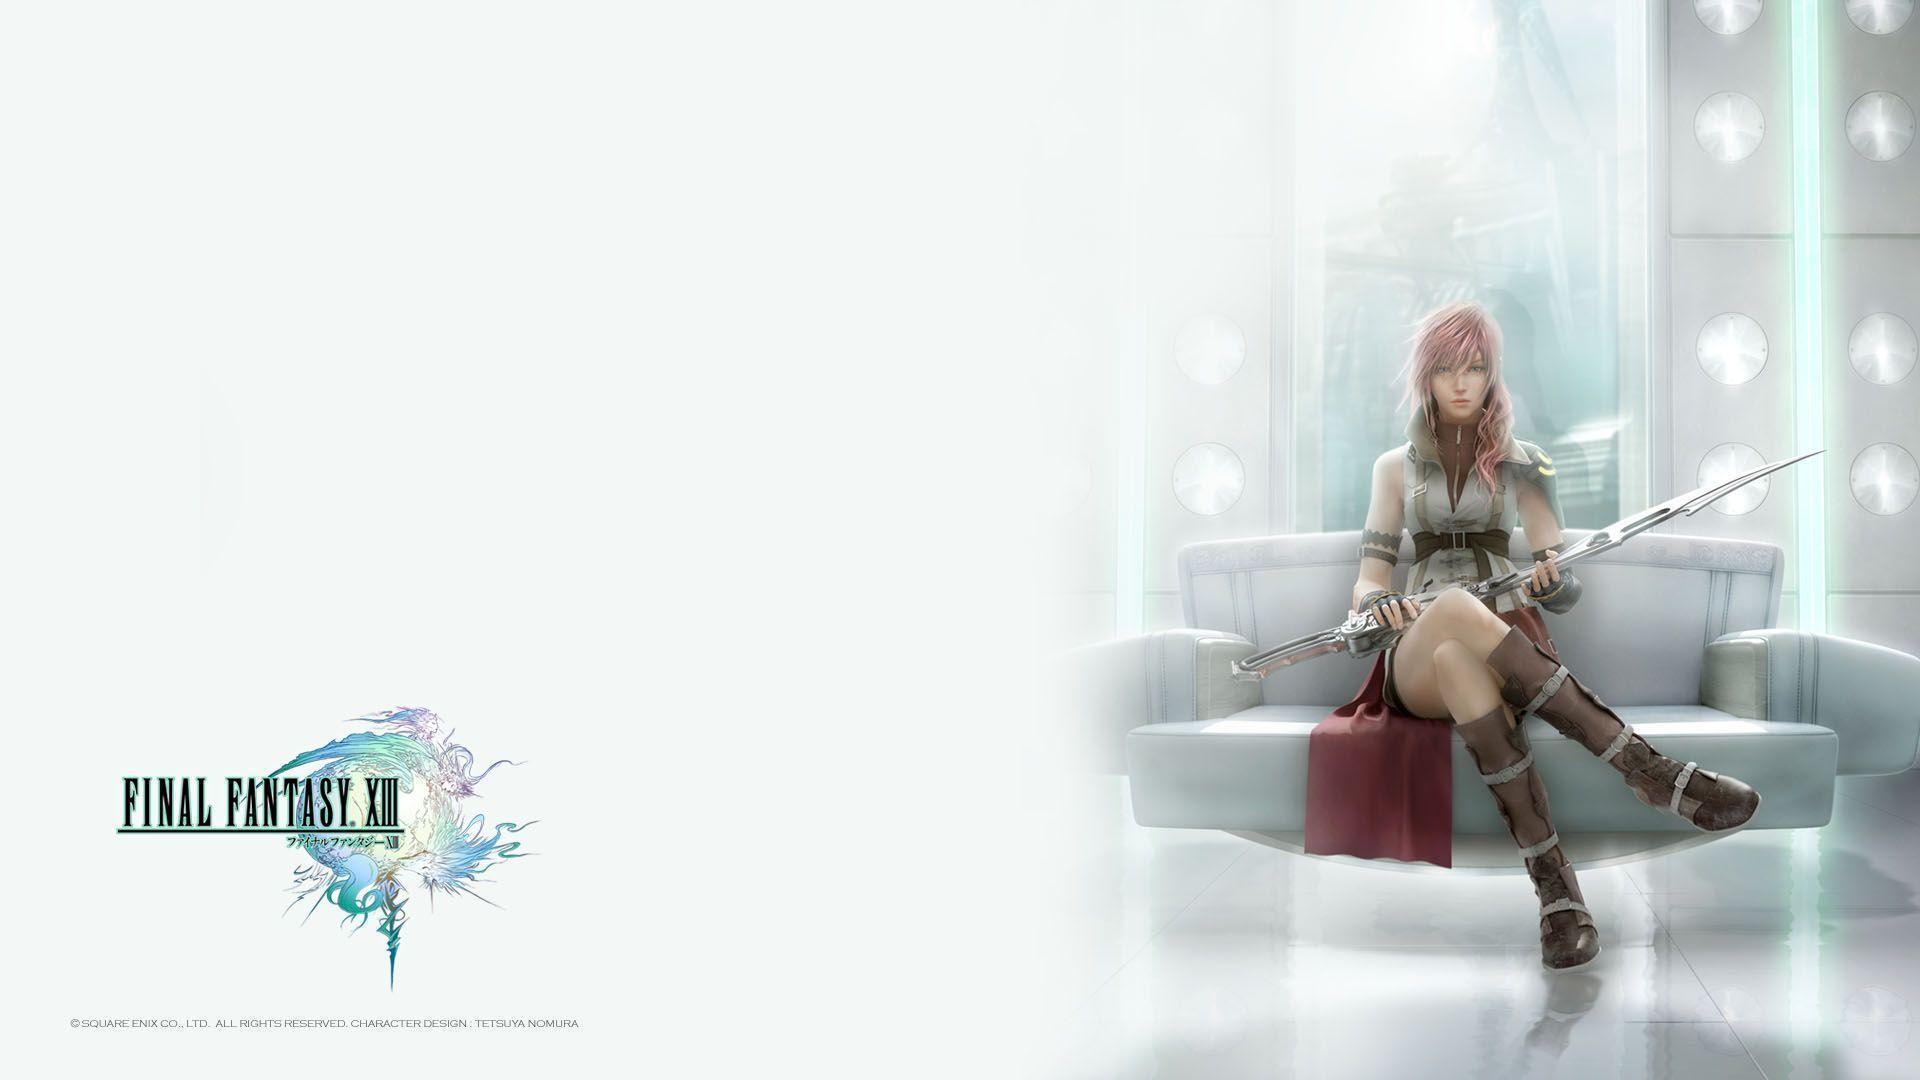 New Final Fantasy XIII Wallpaper And Artwork Even